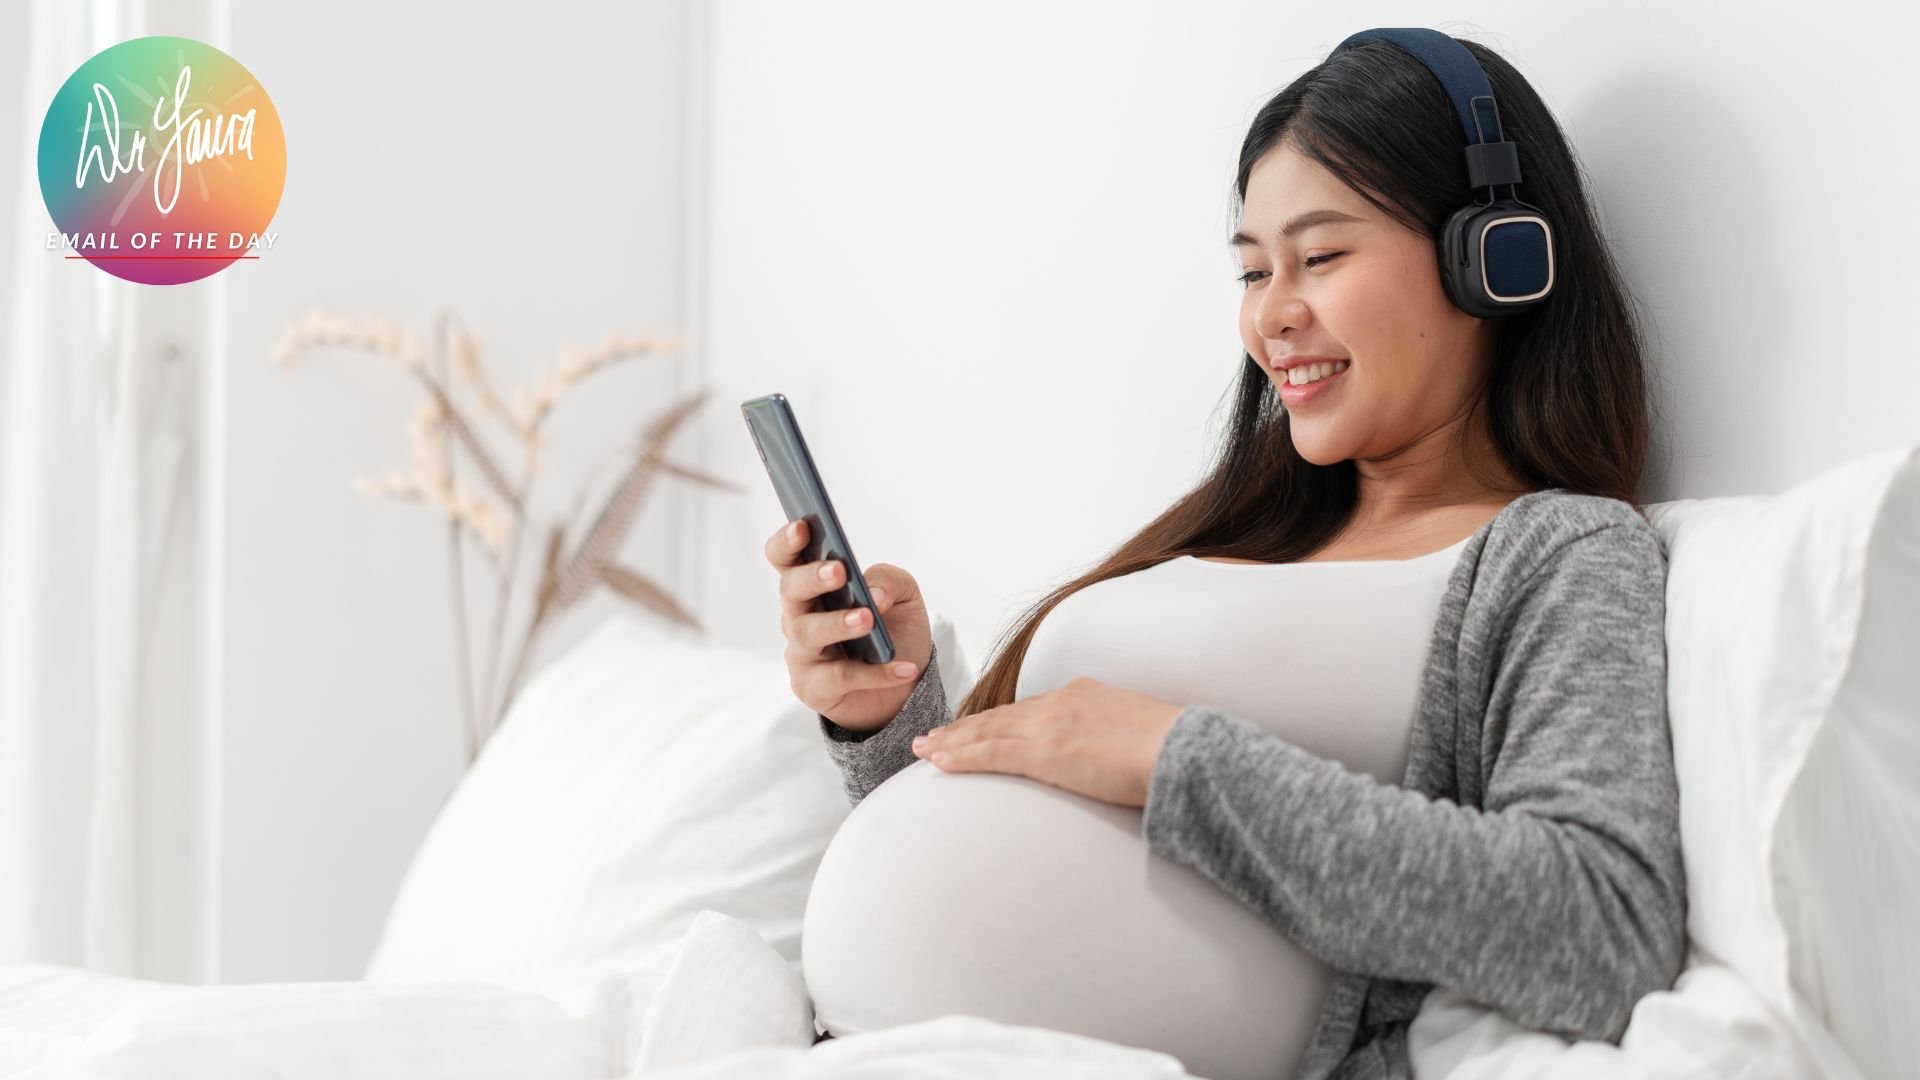 Woman wearing headphones smiles at phone while holding her baby belly